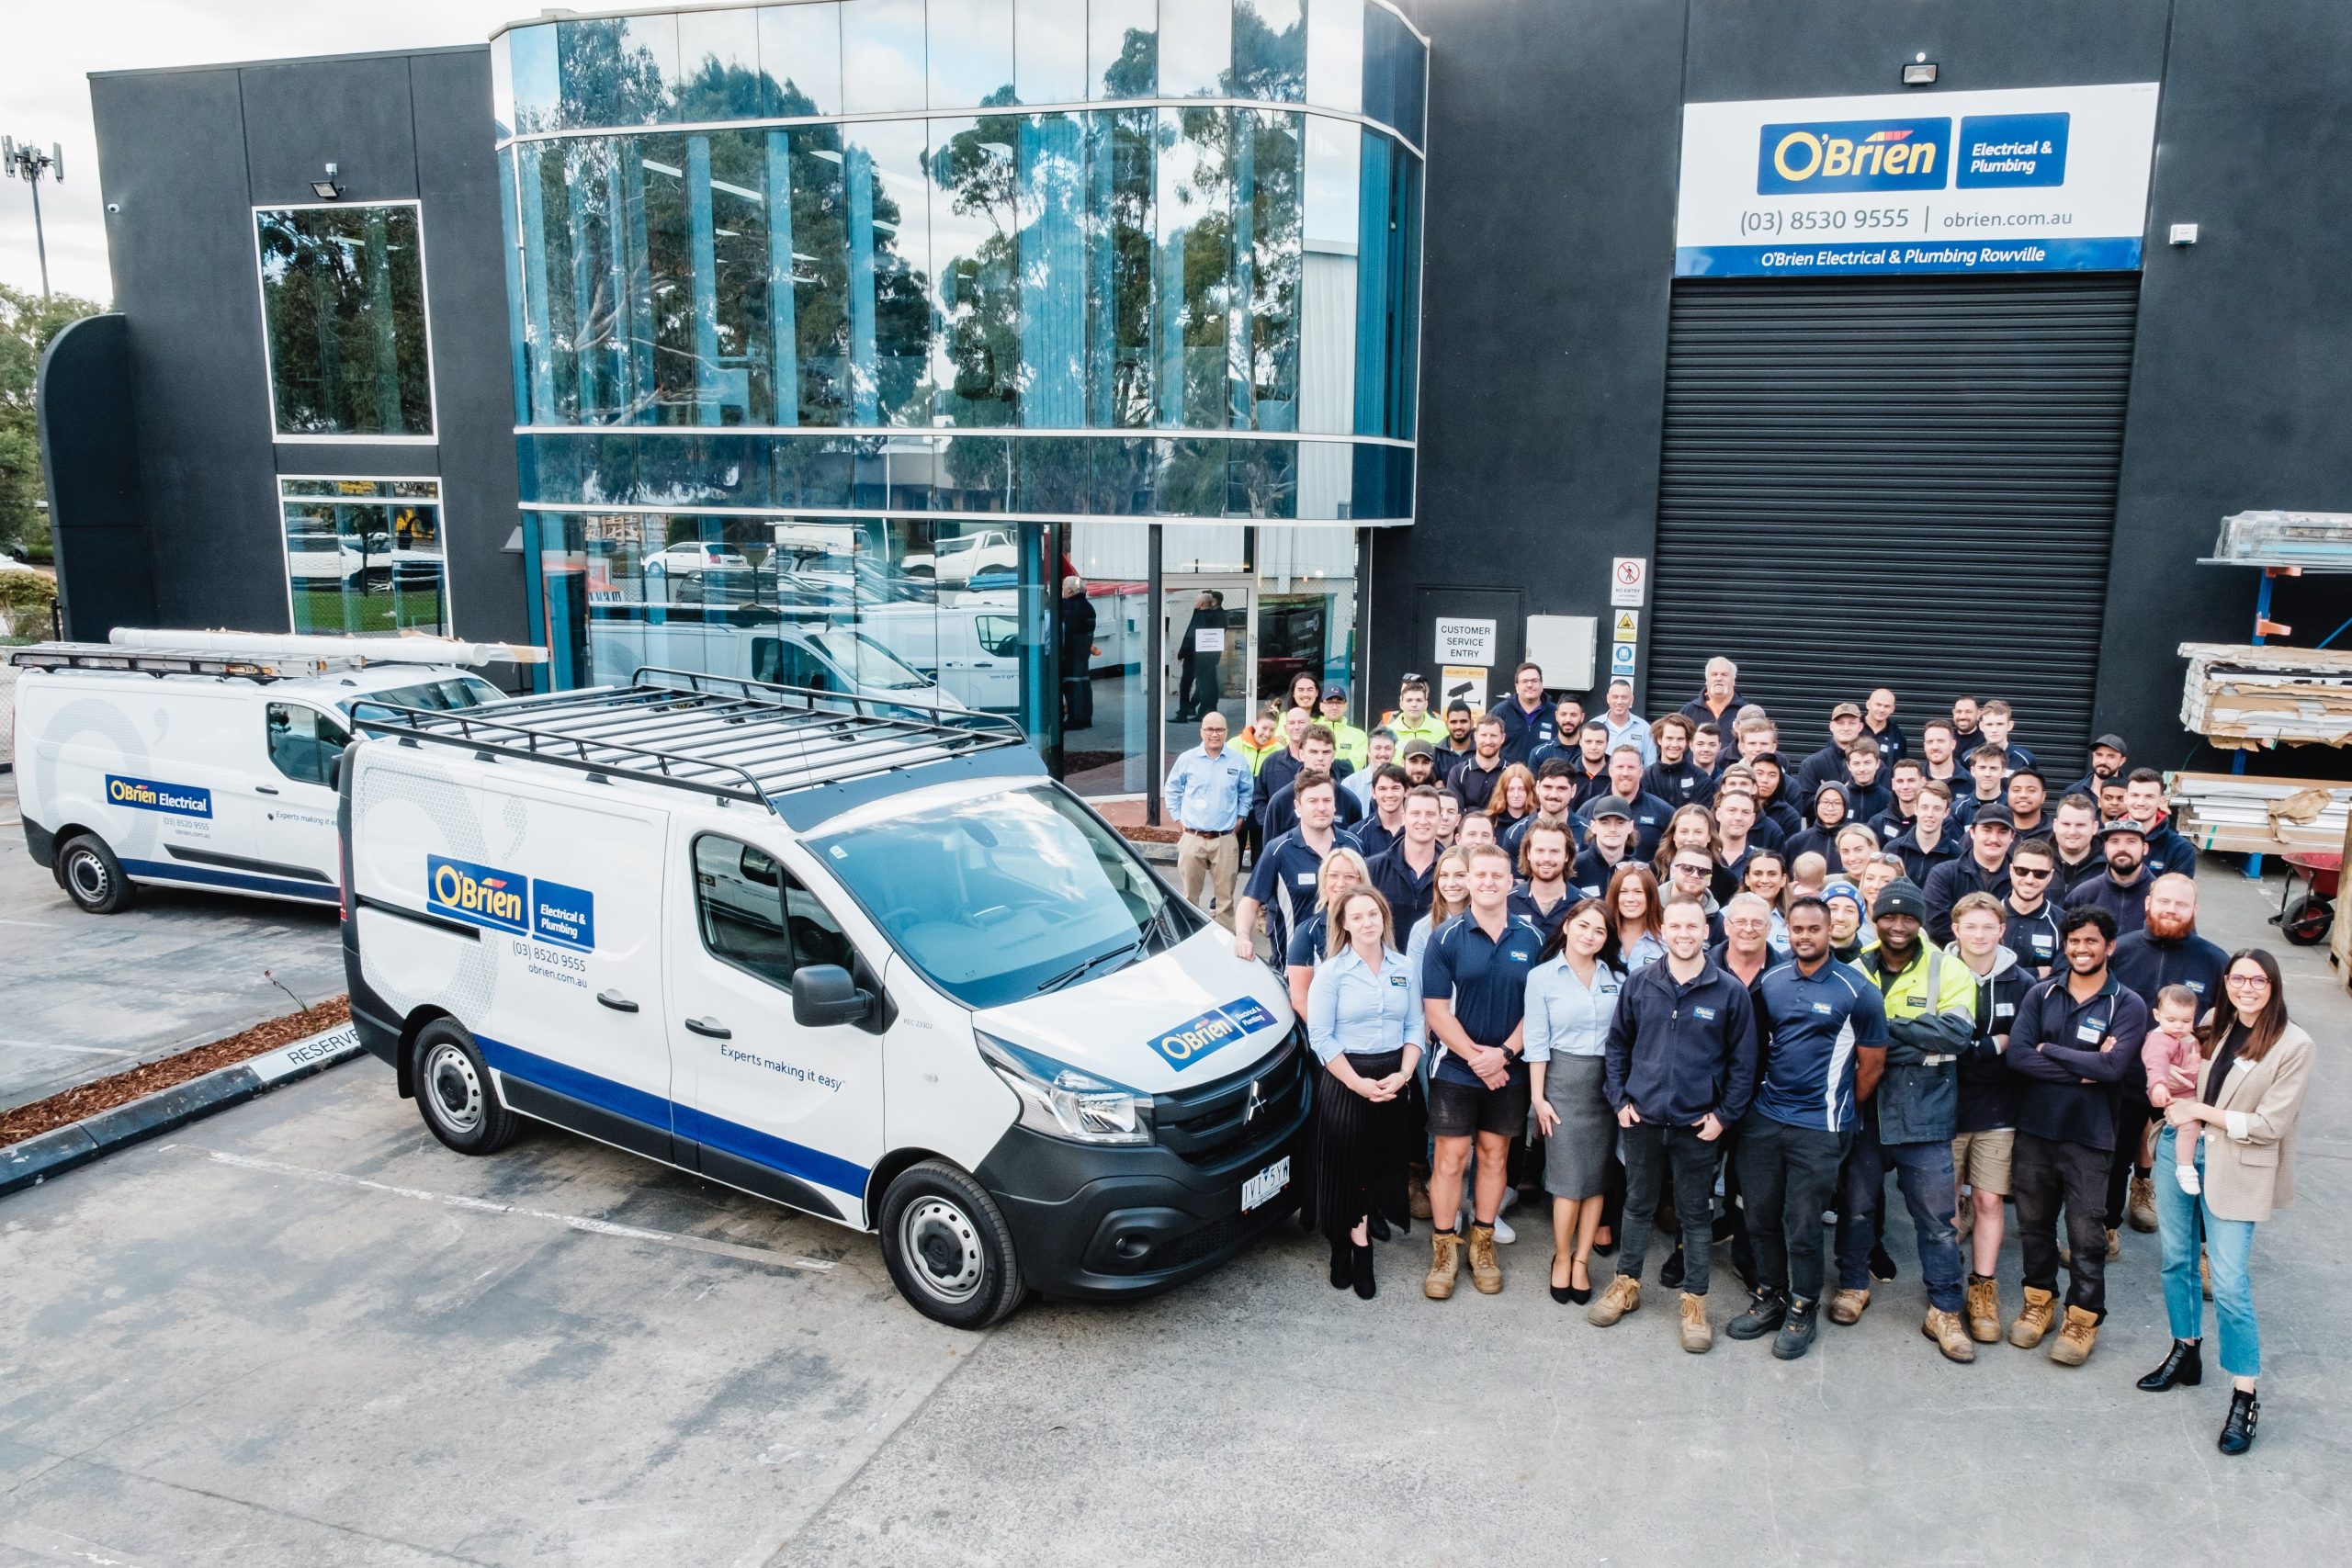 O’Brien Electrical & Plumbing Rowville makes a $15,000 donation to a family in need